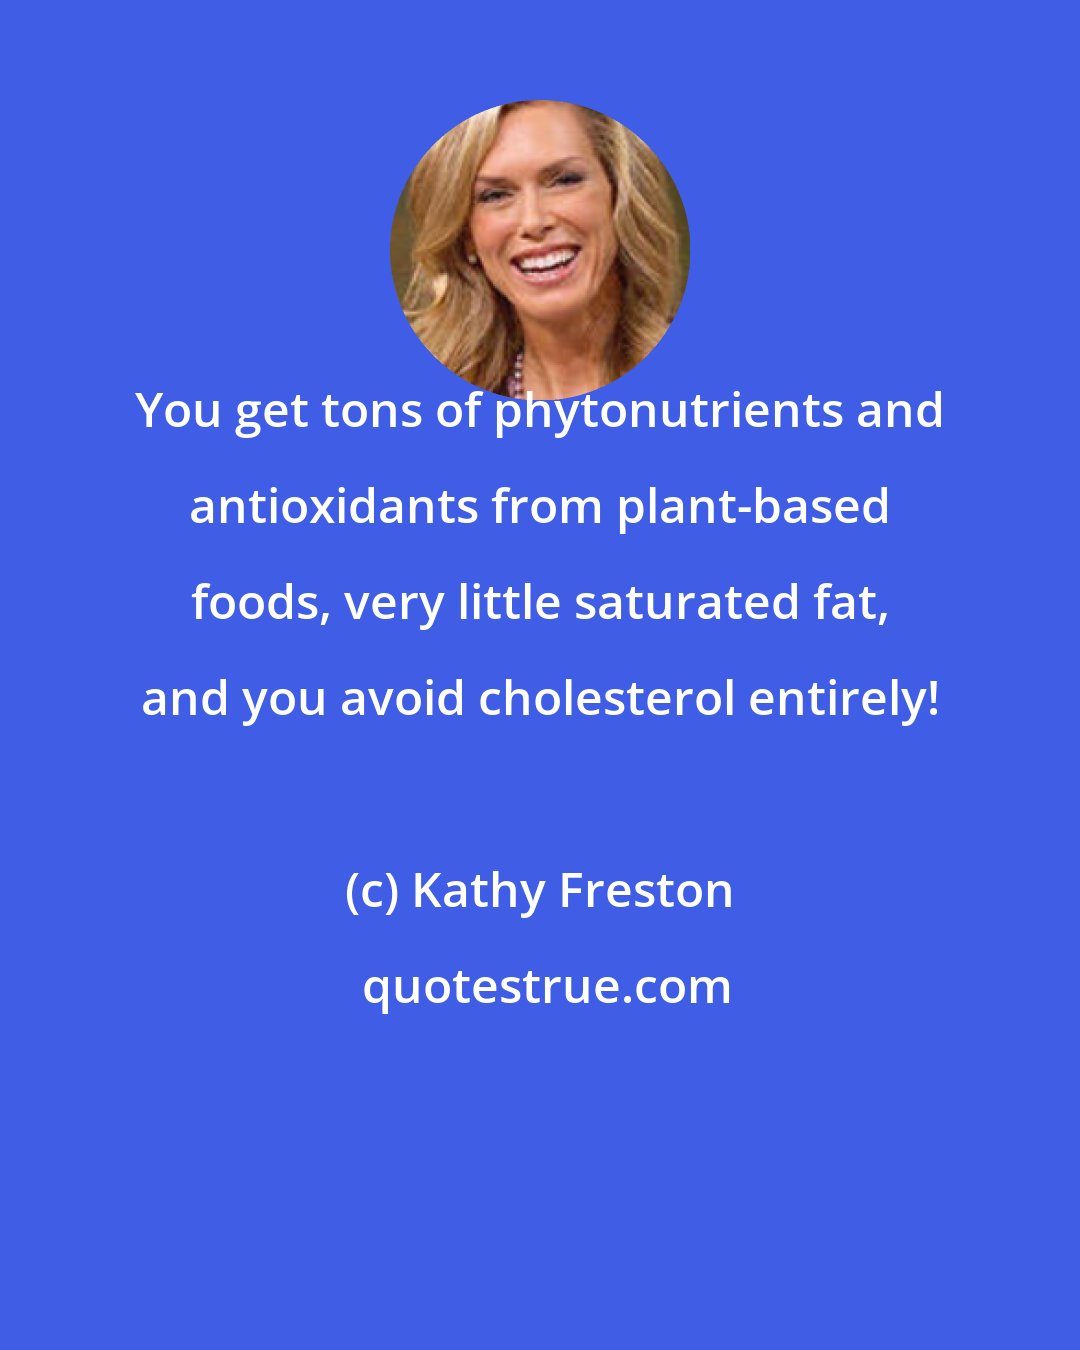 Kathy Freston: You get tons of phytonutrients and antioxidants from plant-based foods, very little saturated fat, and you avoid cholesterol entirely!